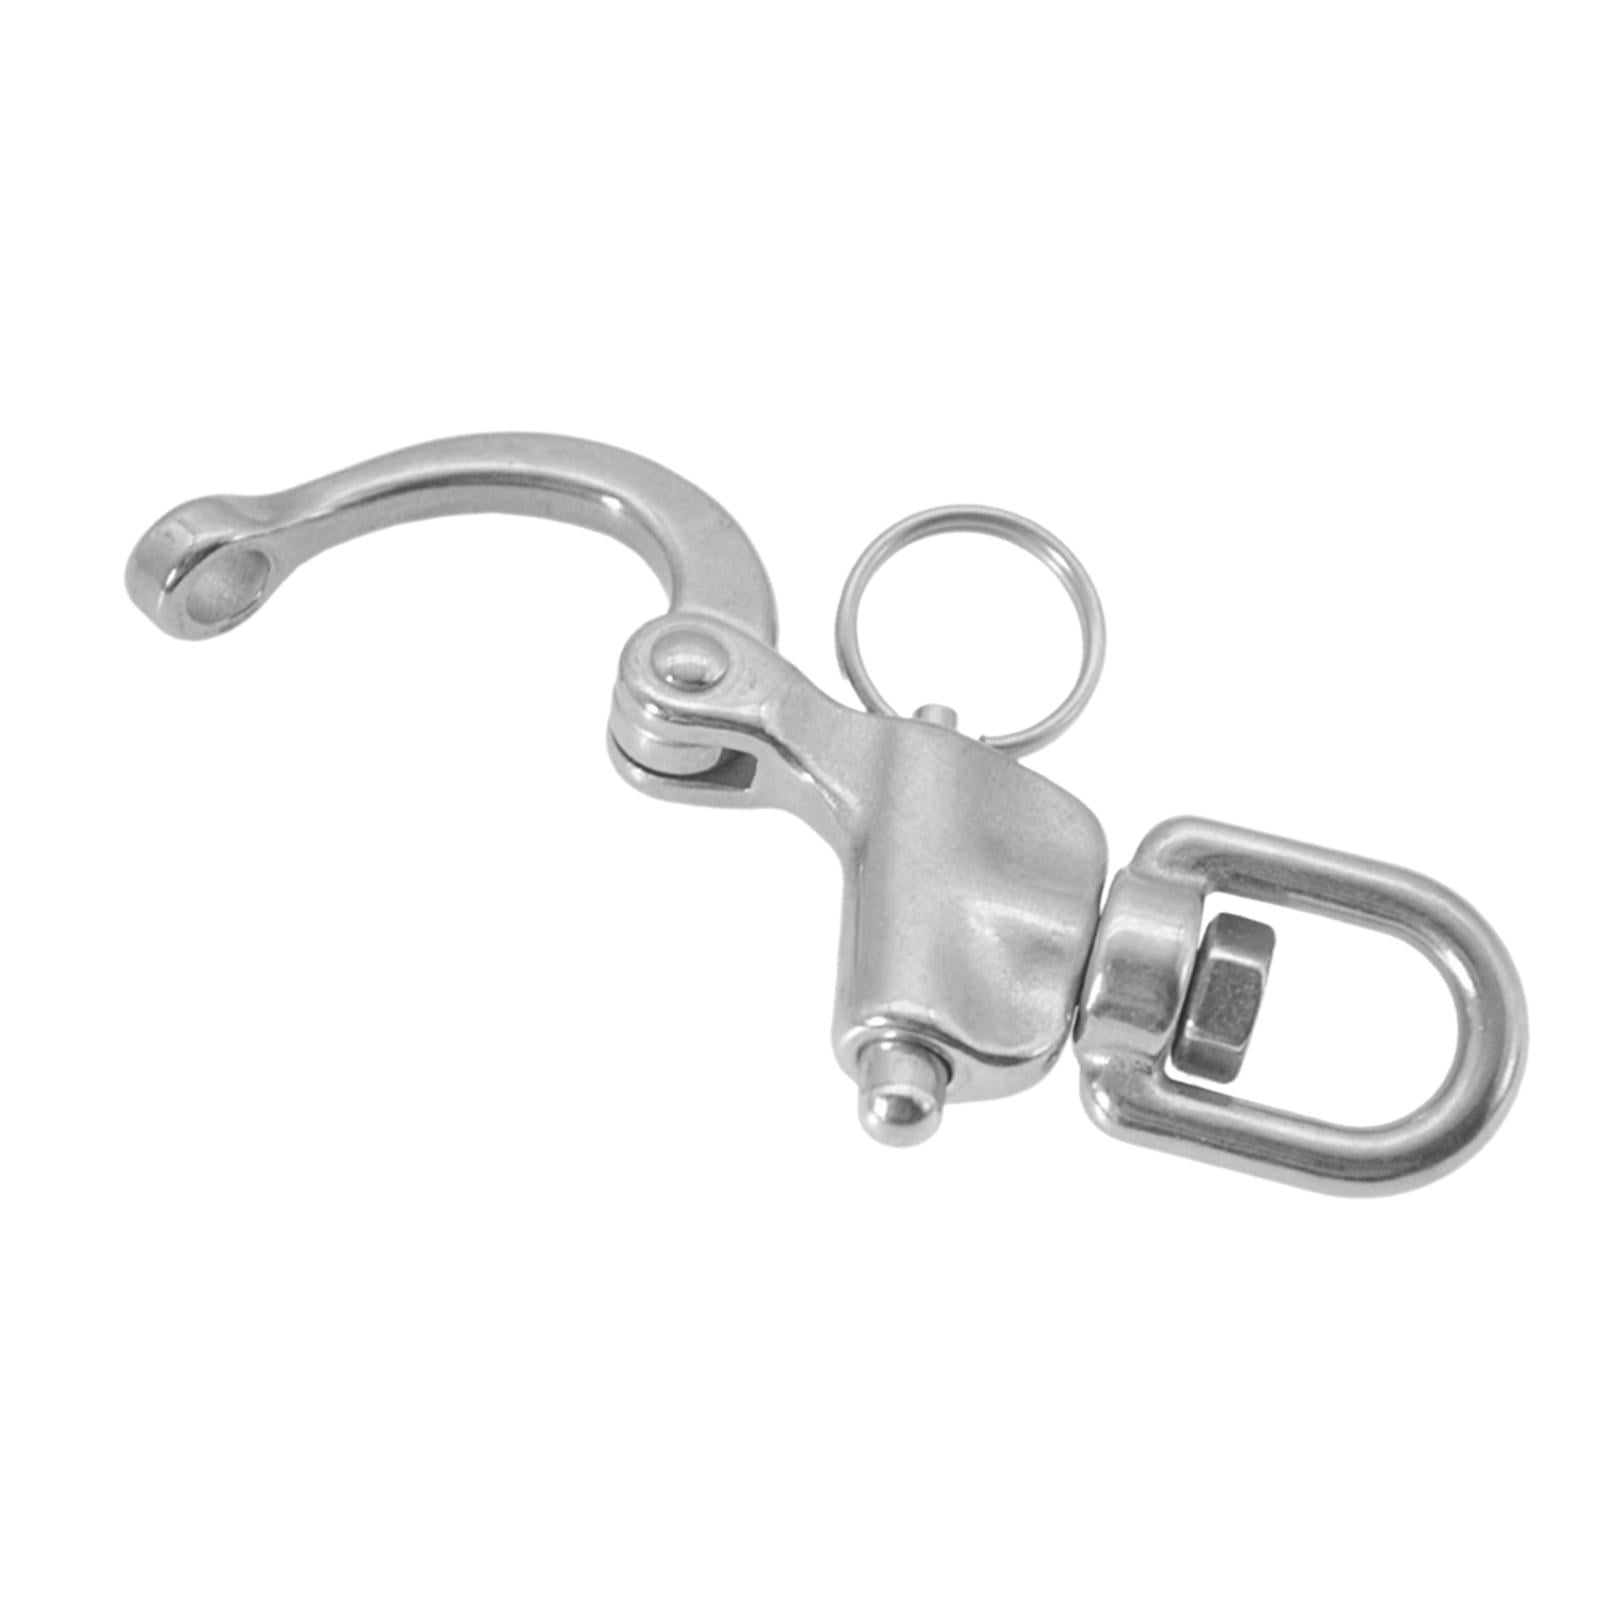 Swivel Eye Snap Hook Shackles Stainless Steel for Rigging, Water Sports, Halyard, Boat Accessories, Sailing Fork Type, Size: 70 mm